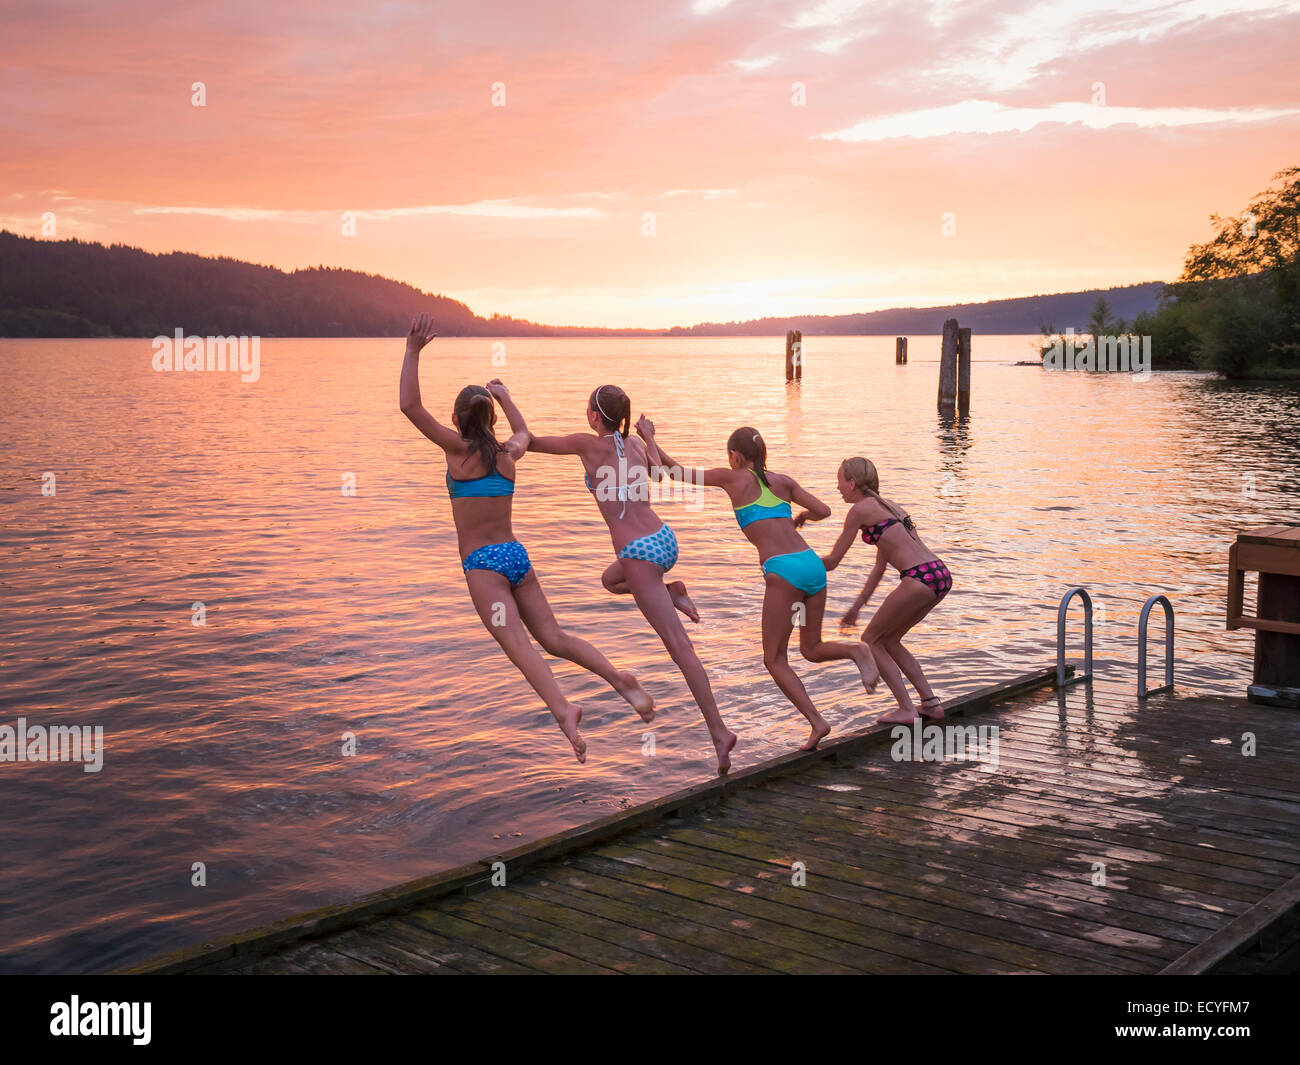 Girls jumping into lake from wooden dock Stock Photo